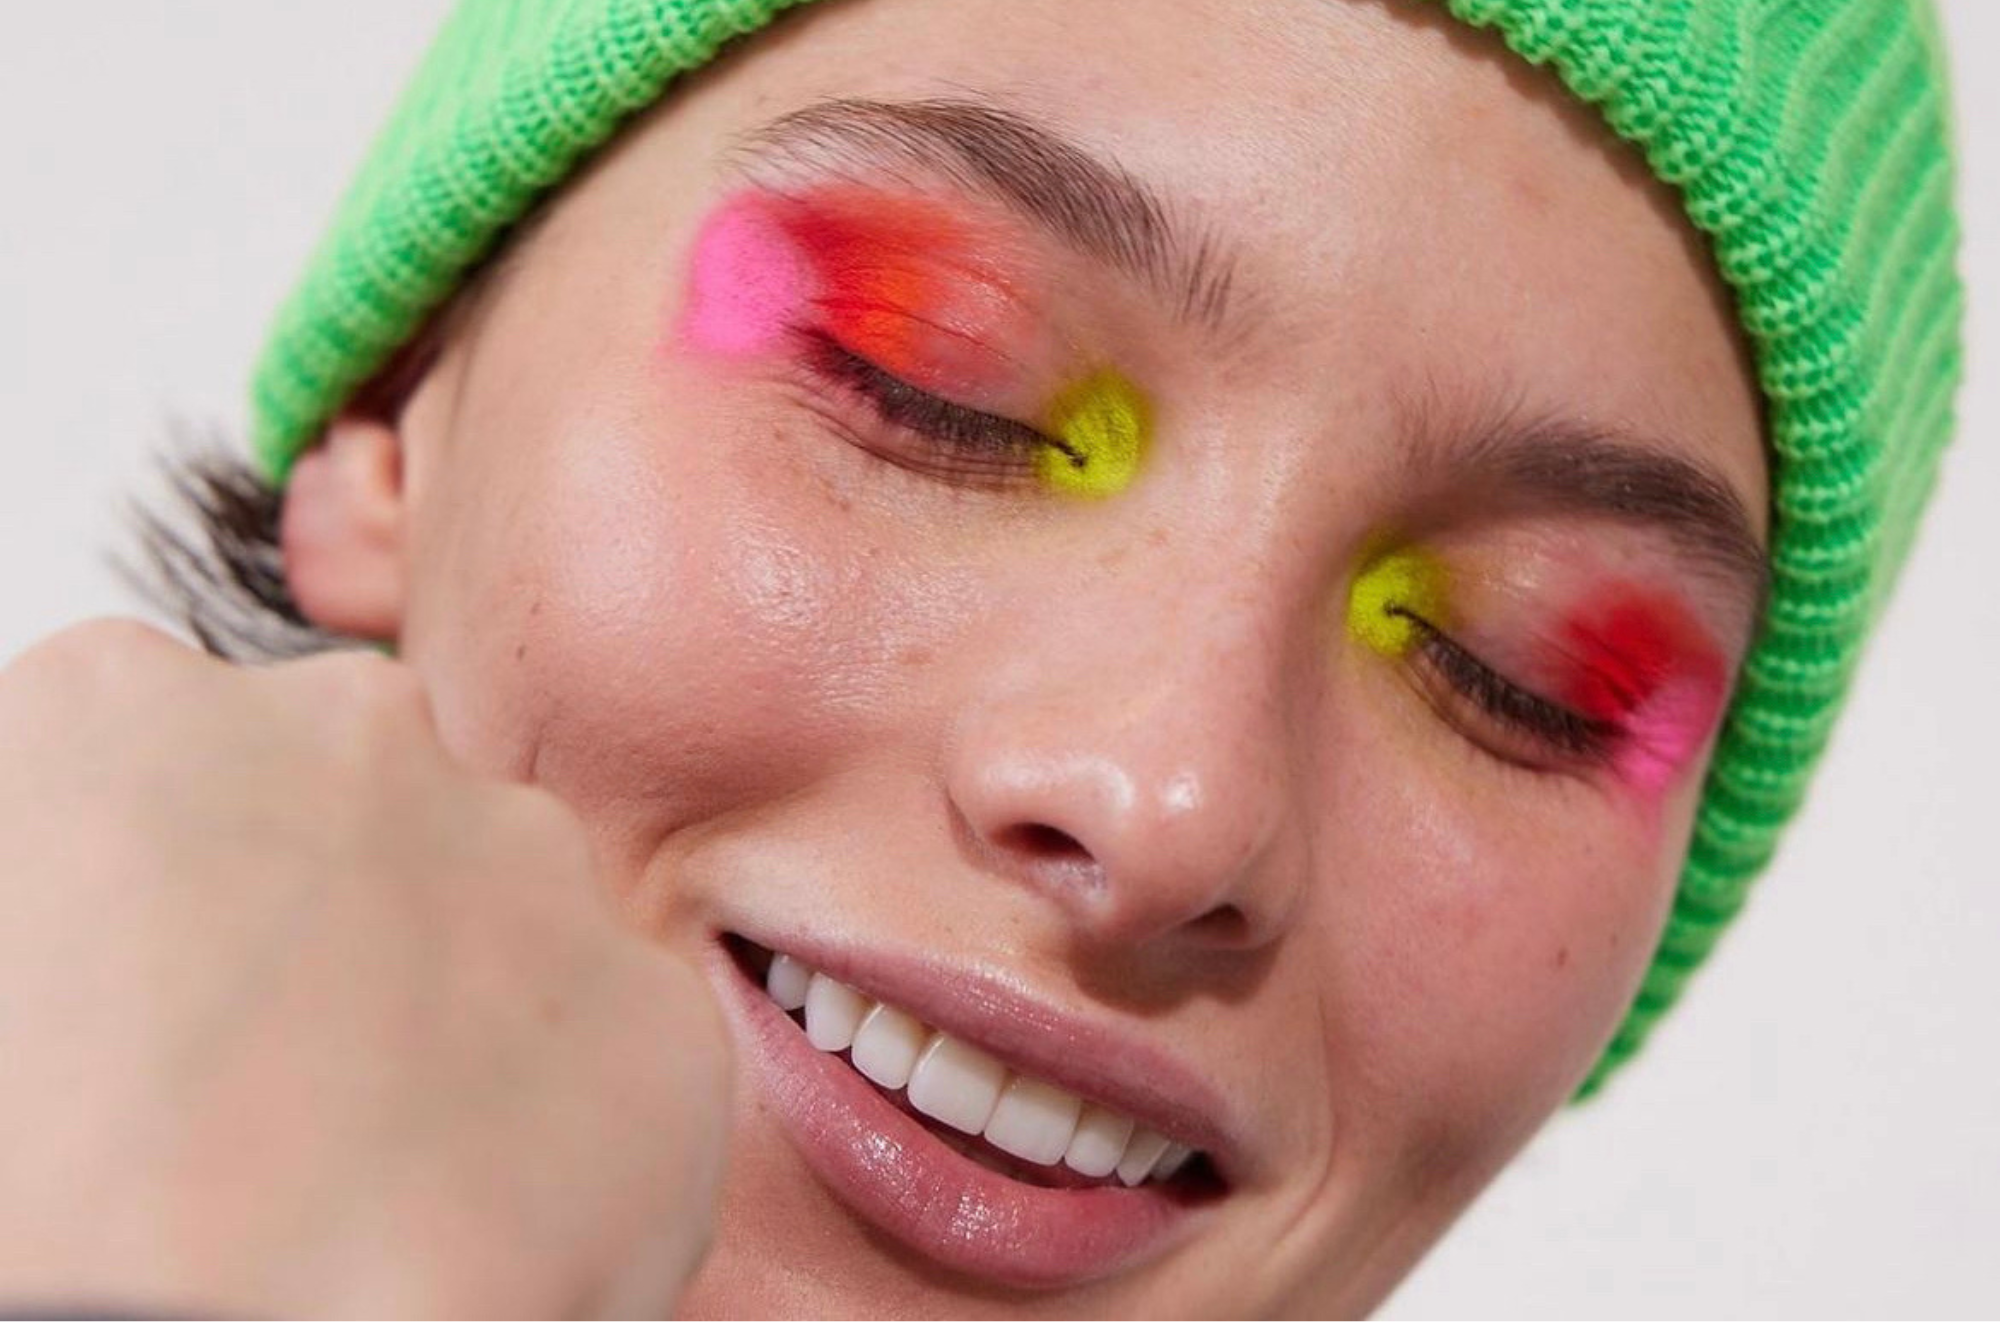 Eyelash Superfan — Another instance of eye color changing - and its